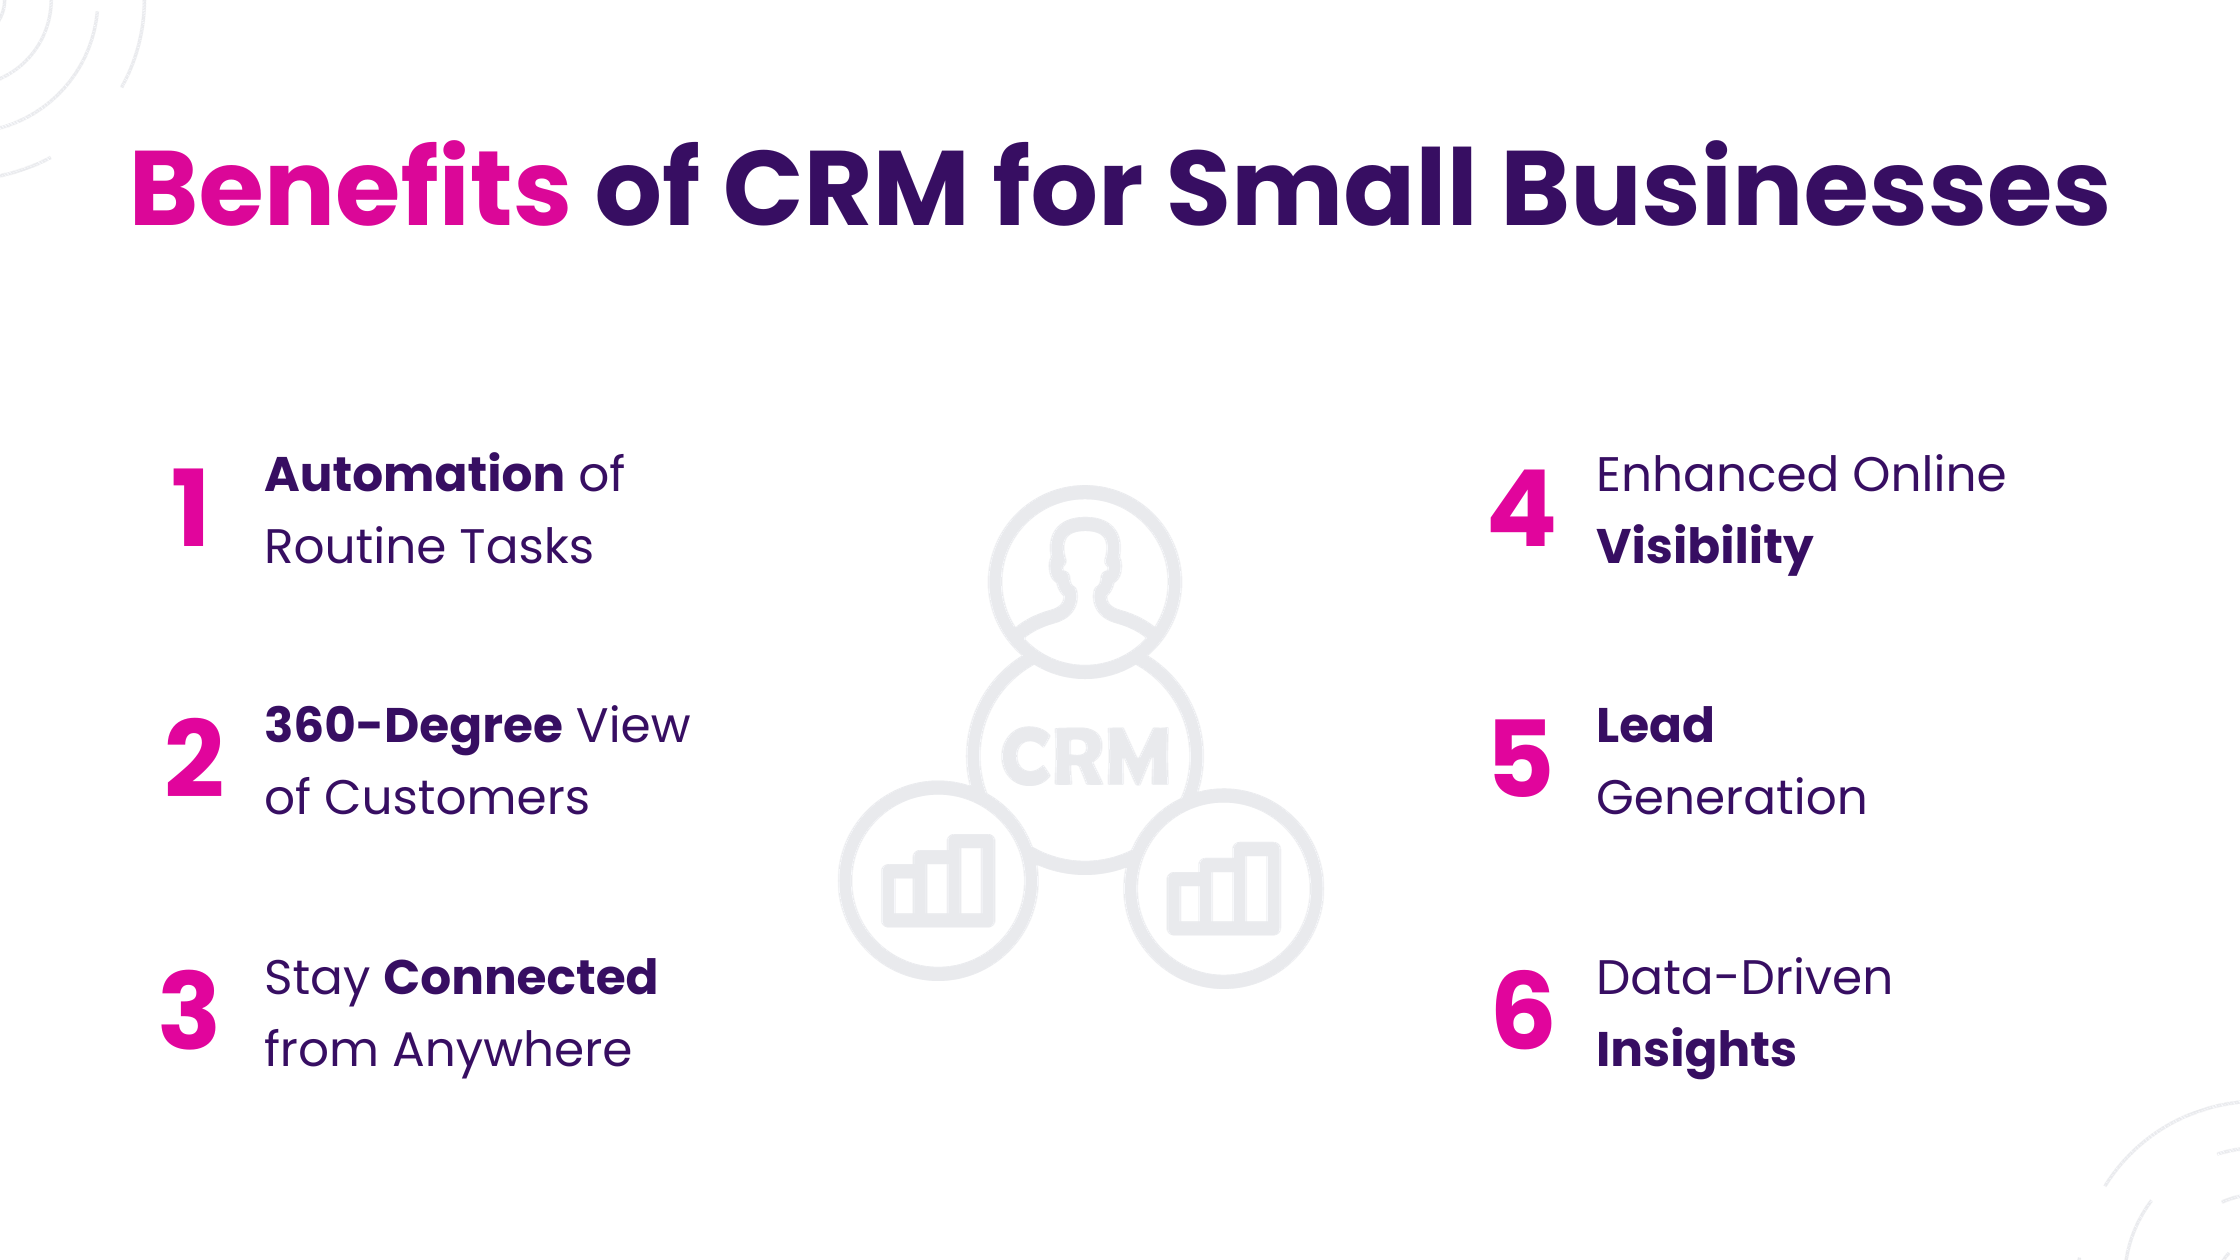 Benefits of CRM for Small Businesses